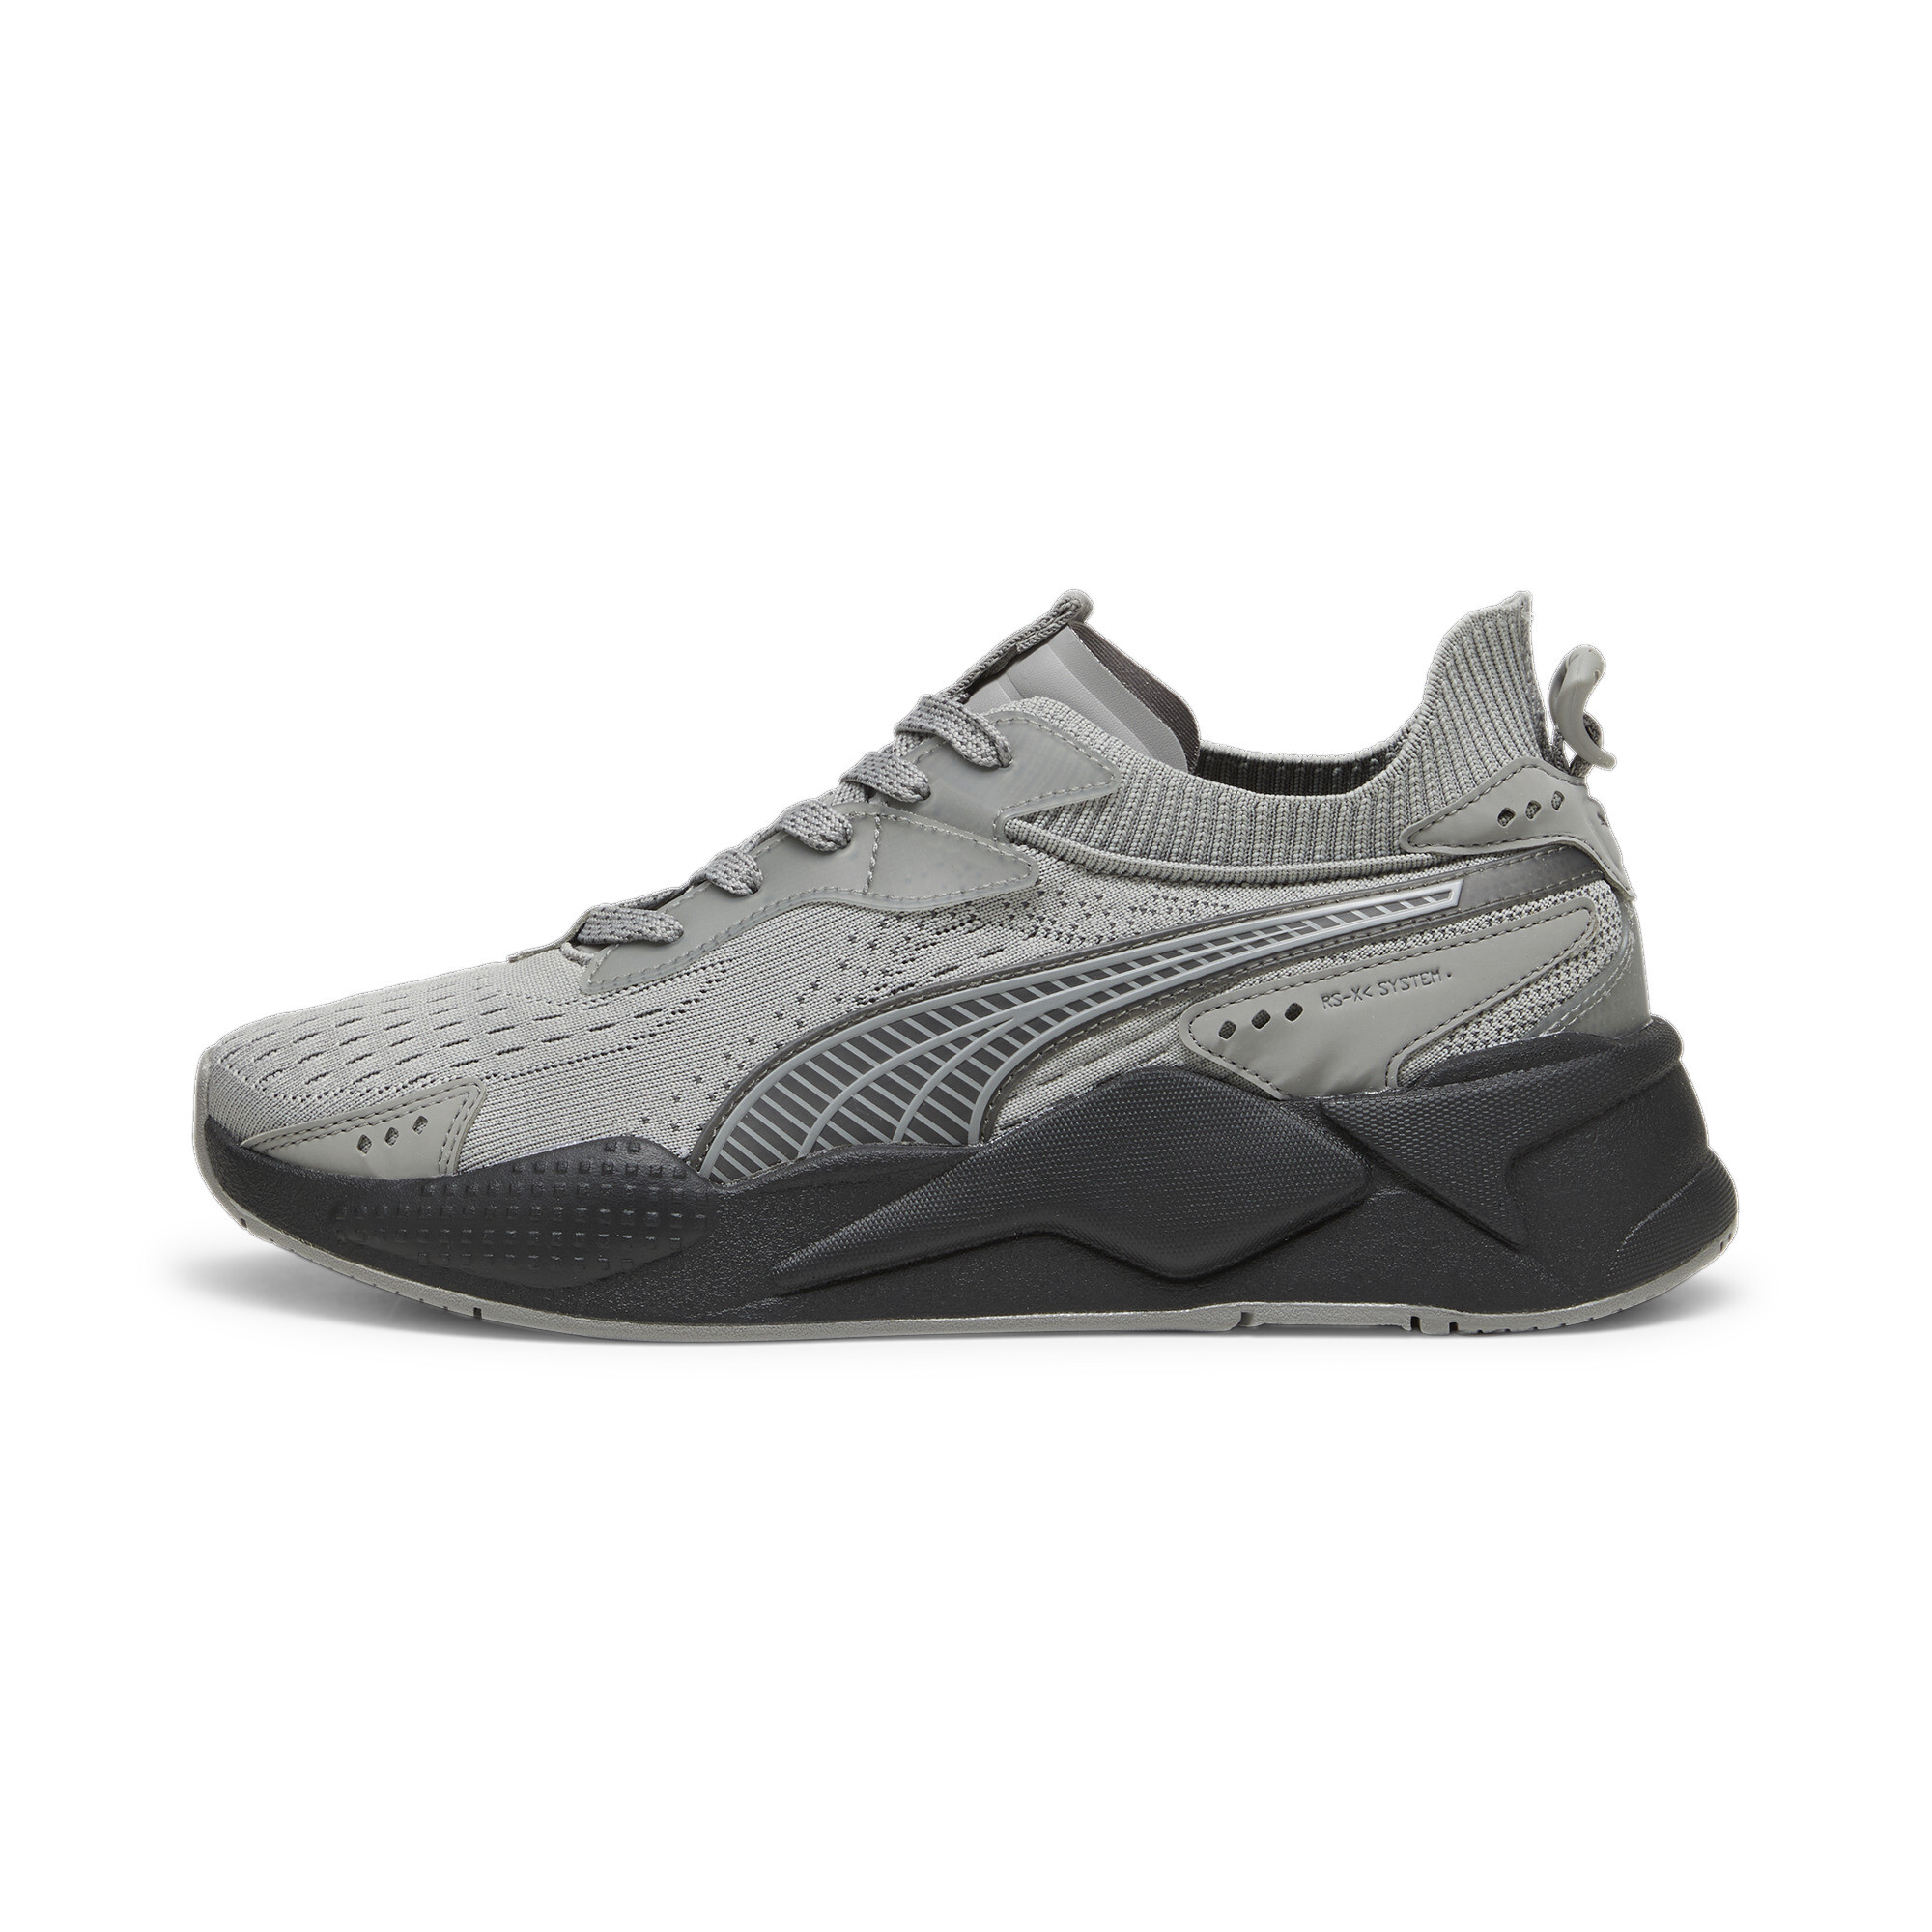 Puma RS-XK REMIX Sneakers, Gray, Size 43, Shoes